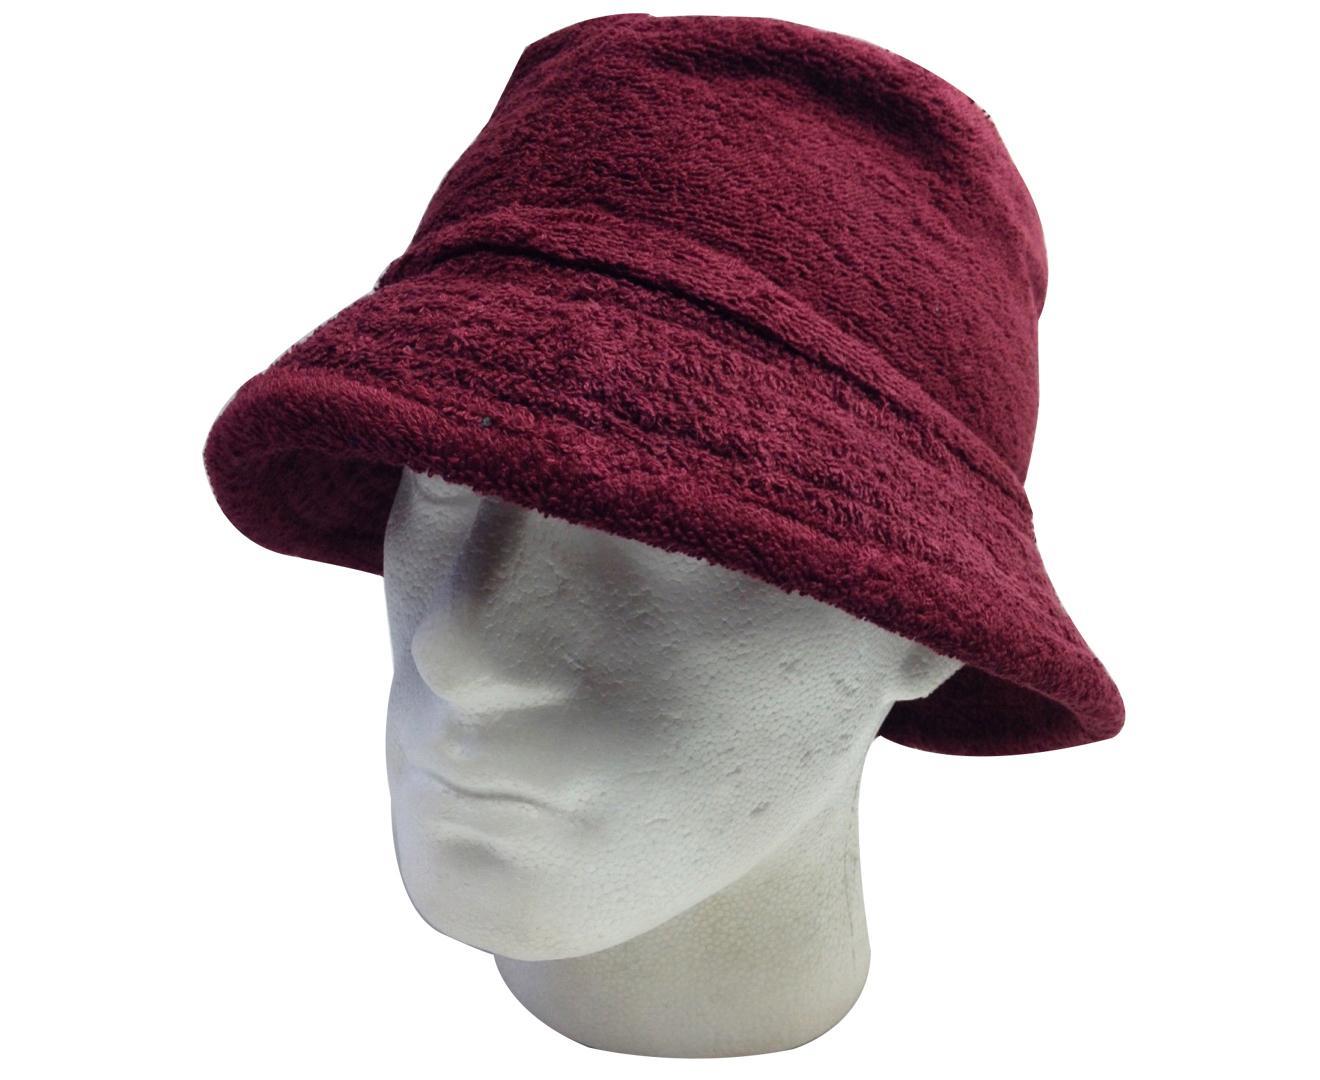 Terry Towelling BUCKET HAT Daggy Fishing Camping Lad Cap Retro 100% COTTON - Burgundy - Large